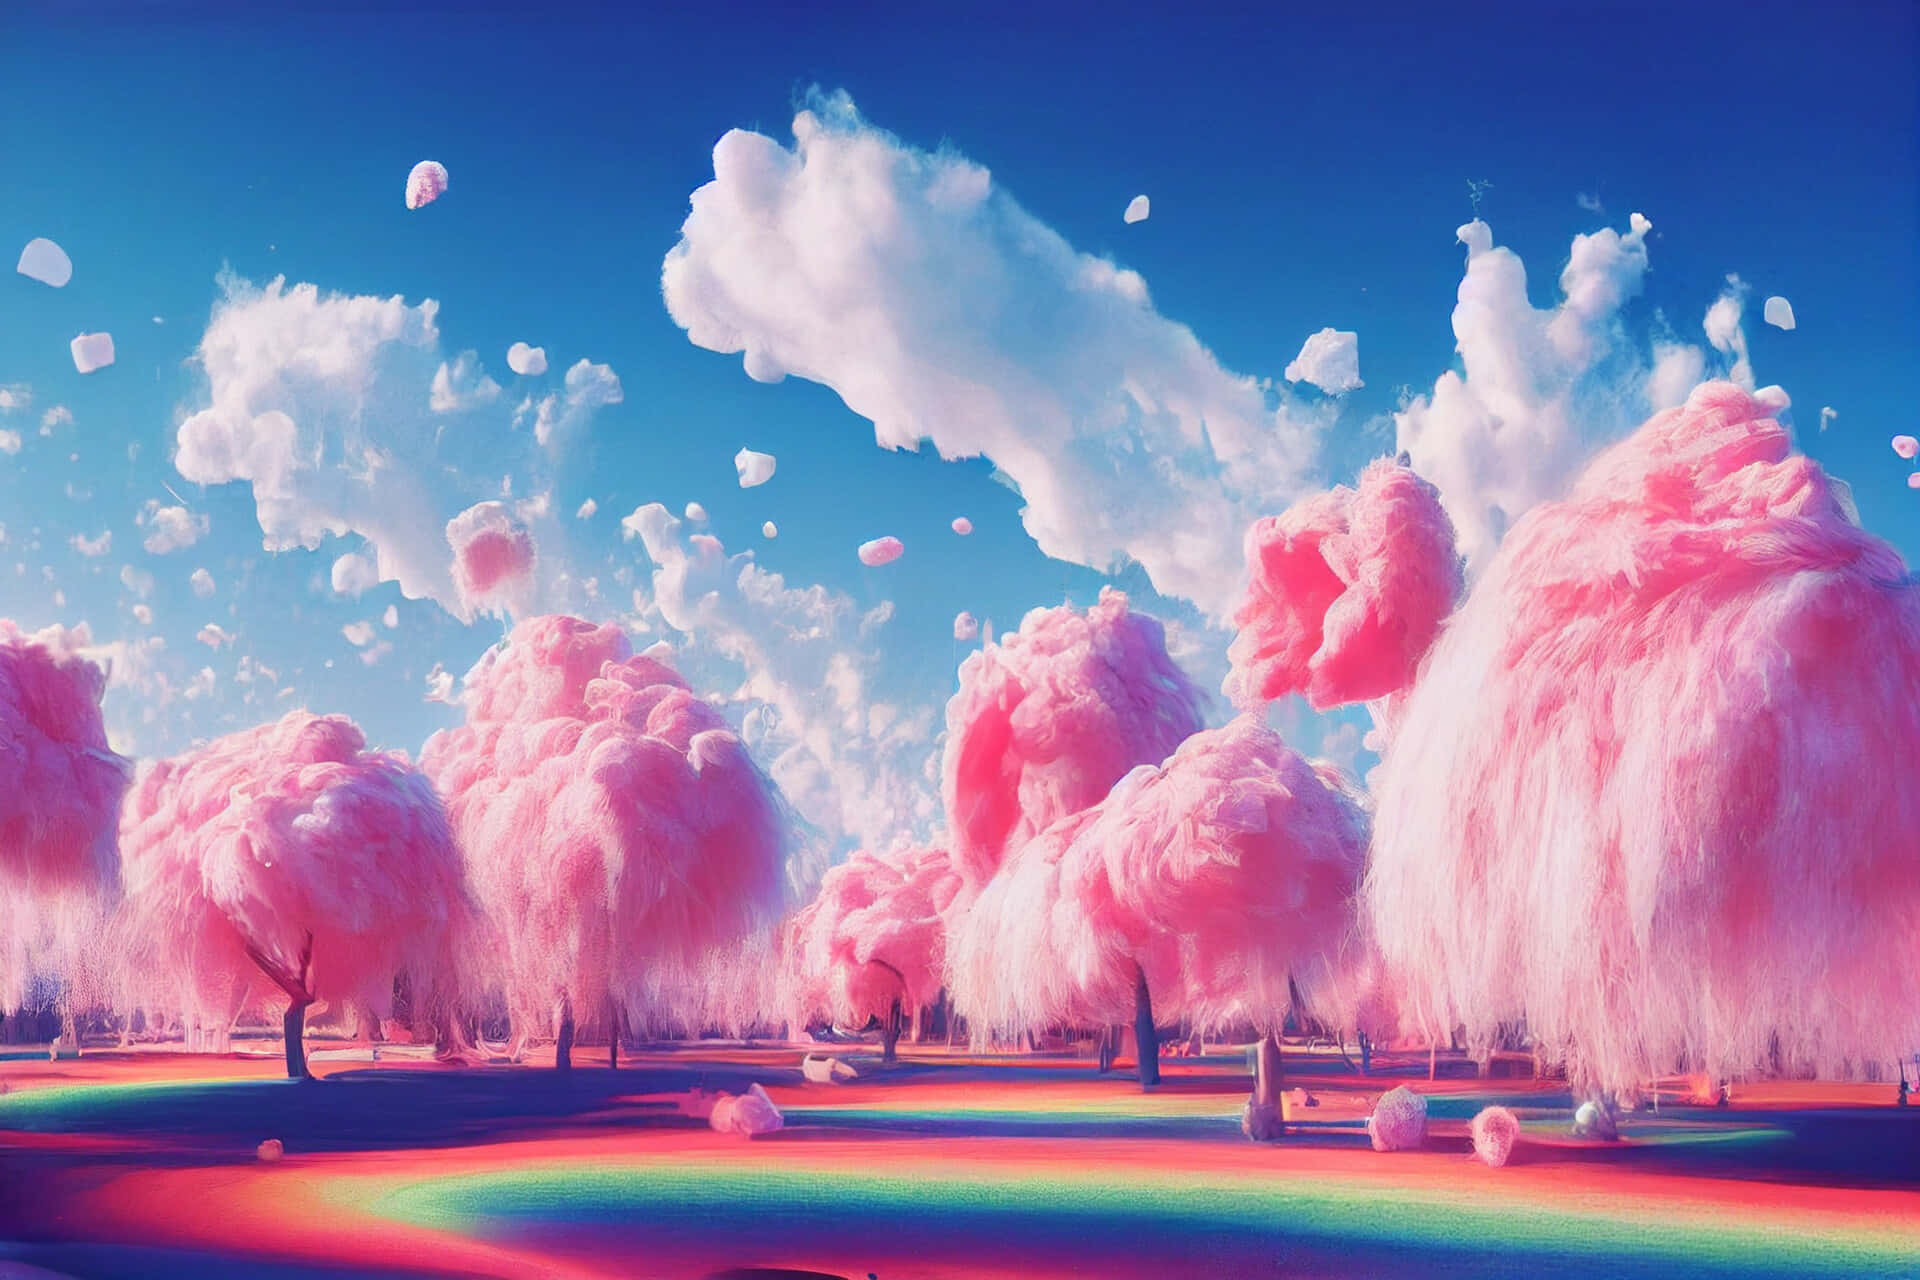 Pink Fluffy Unicorns Dancing On Rainbow Wallpapers - Wallpaper Cave